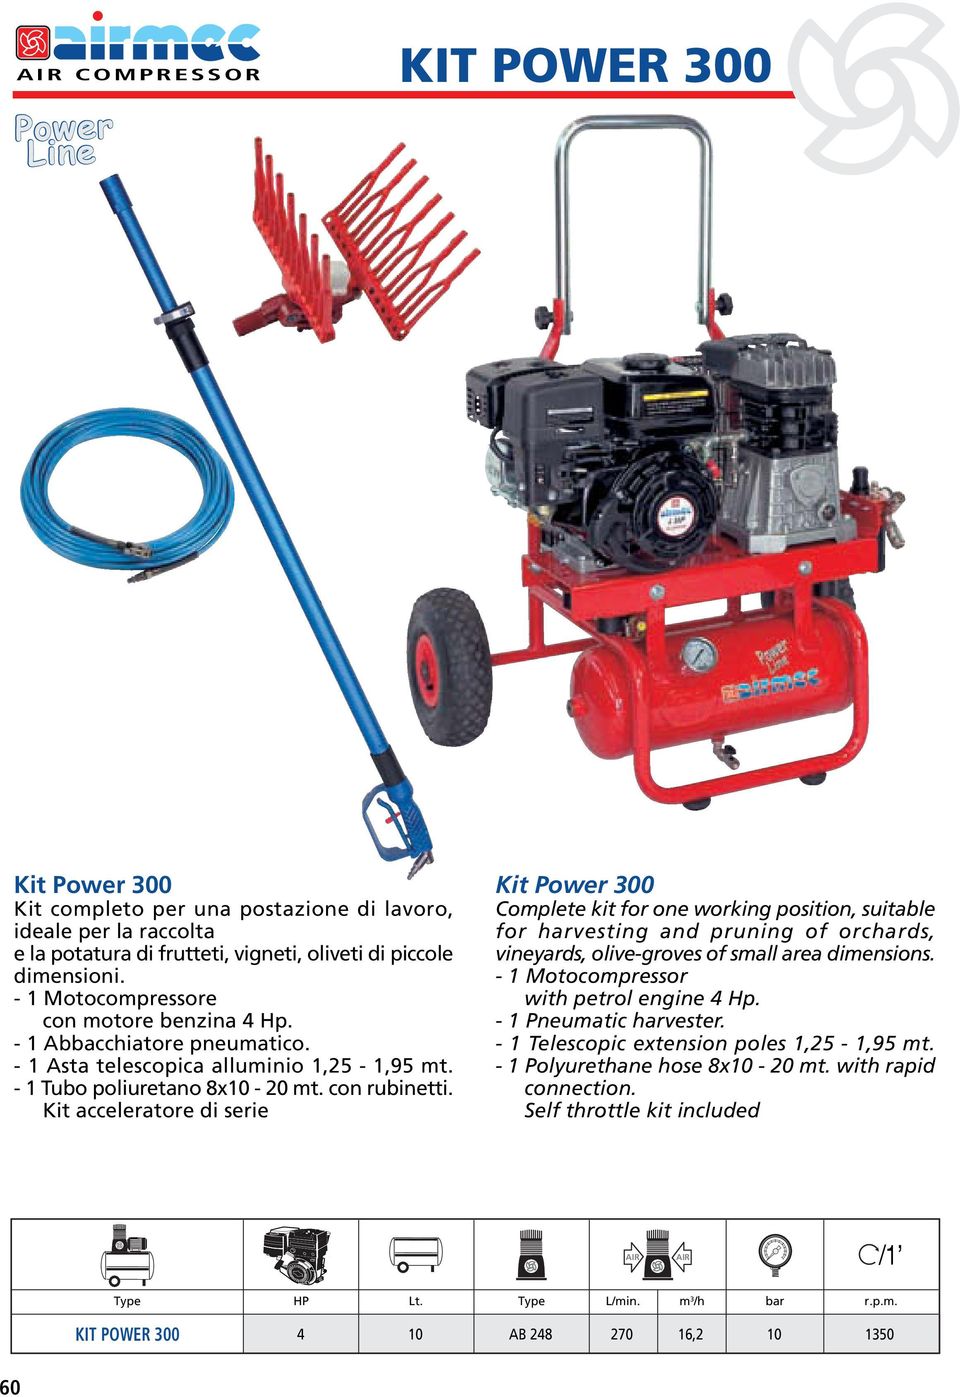 Kit acceleratore di serie Kit Power 300 Complete kit for one working position, suitable for harvesting and pruning of orchards, vineyards, olive-groves of small area dimensions.